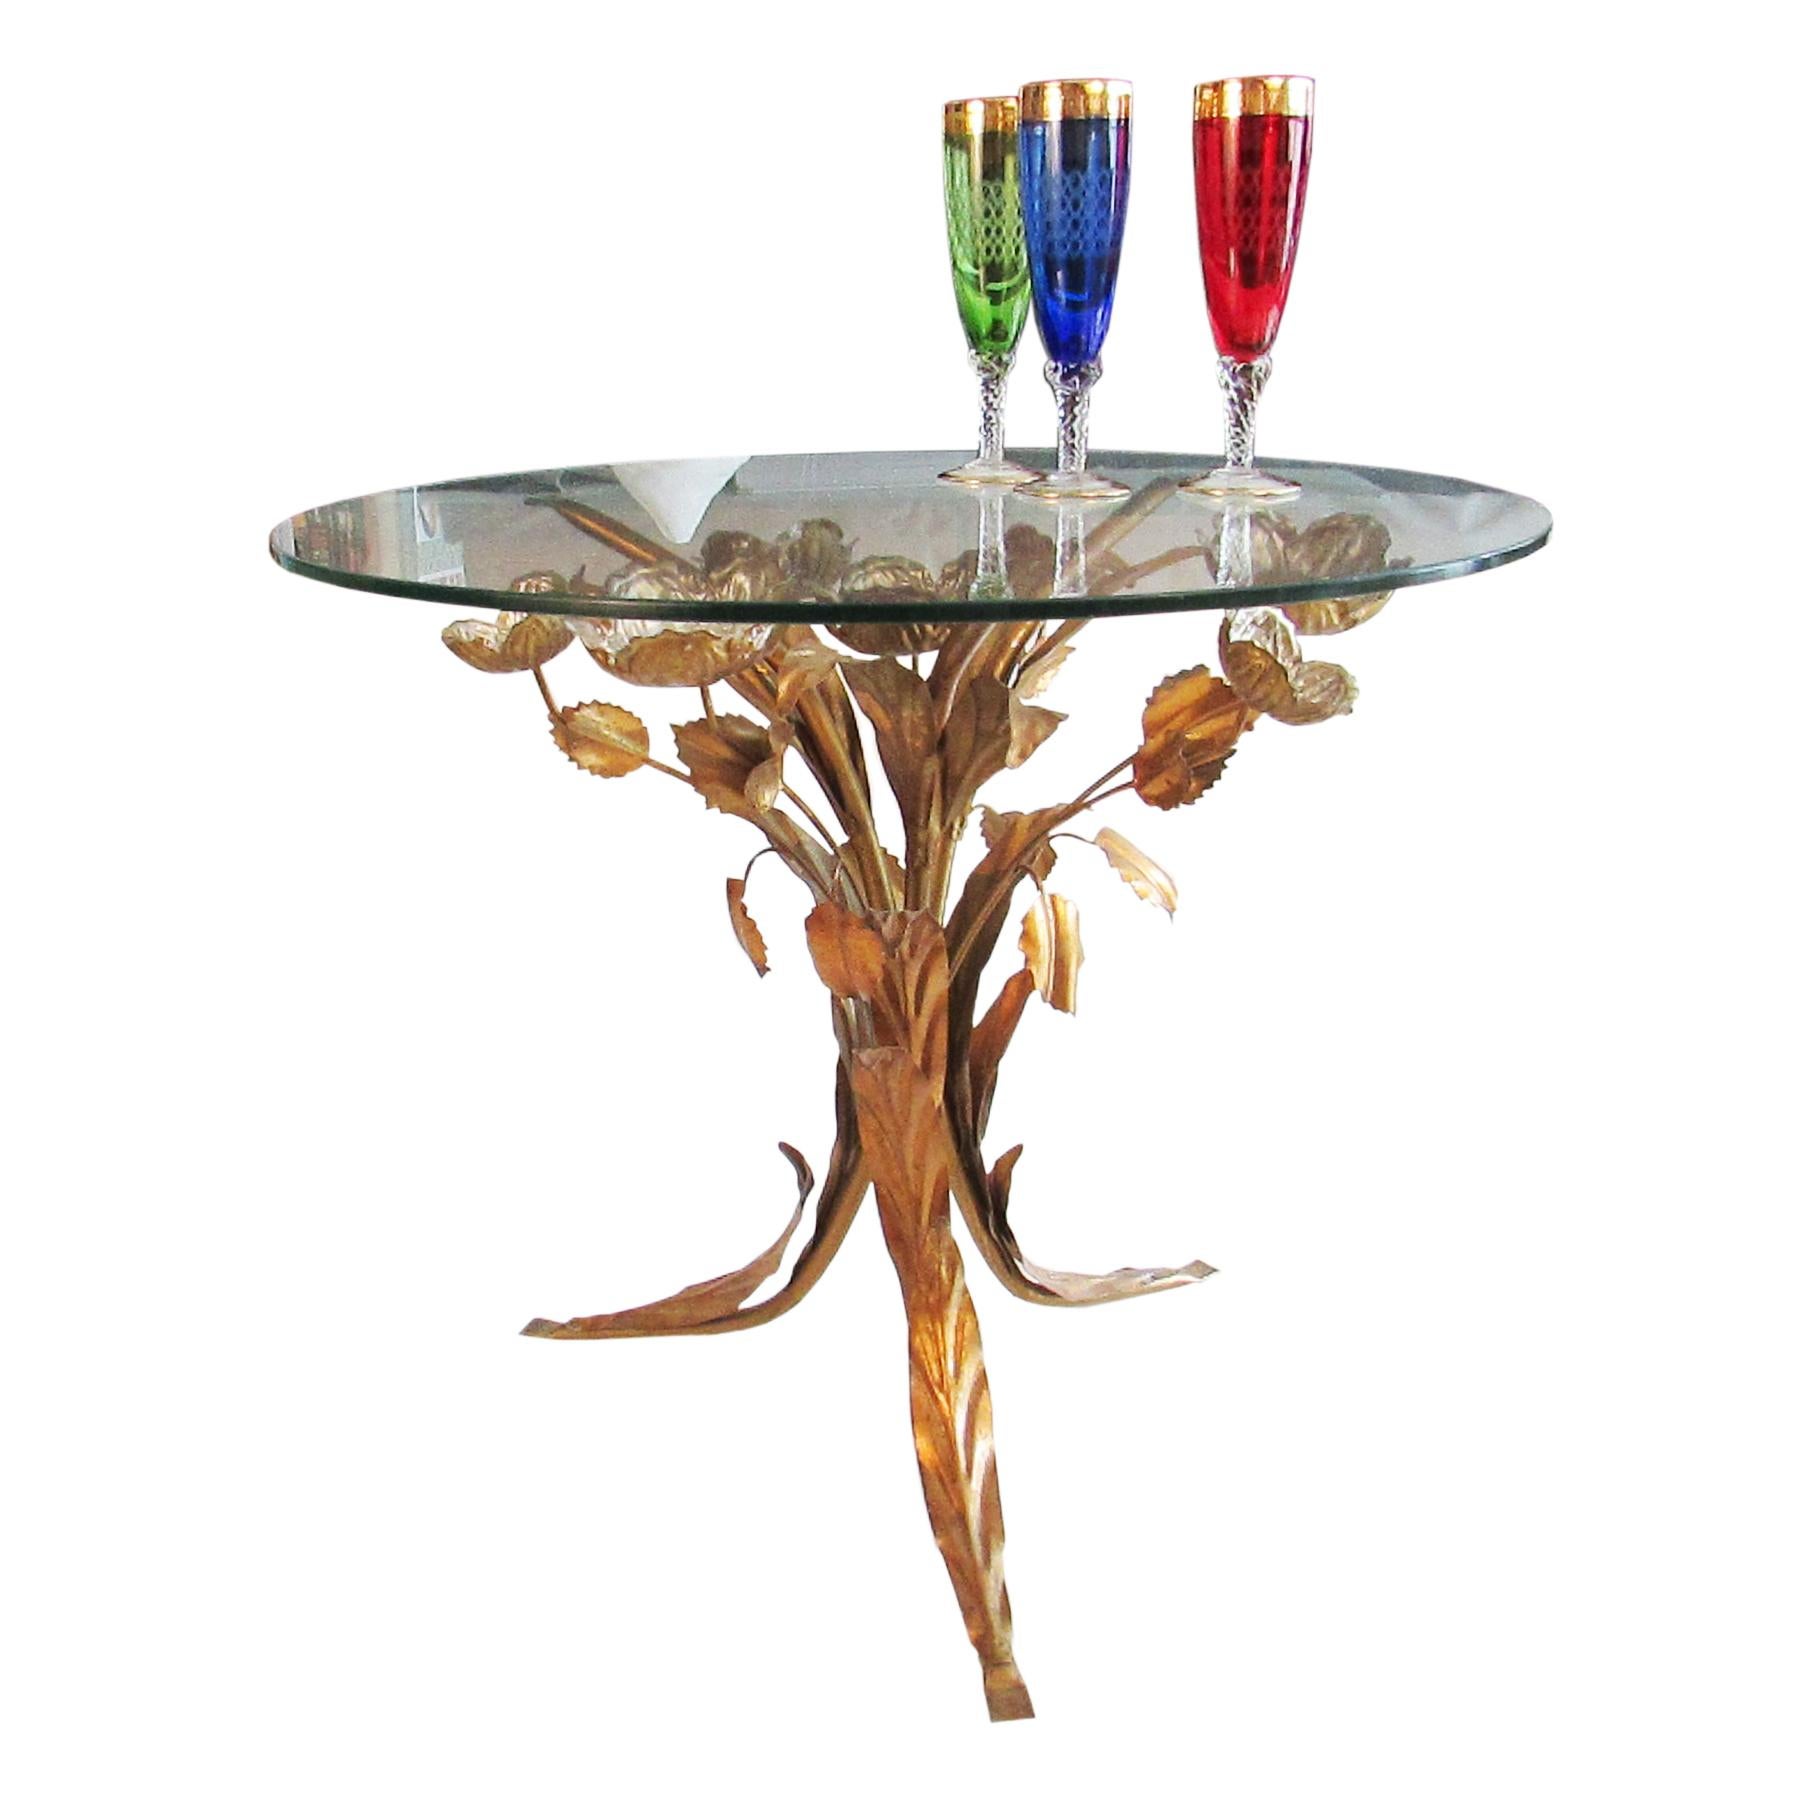 Nice side table with glass top and gilt metal structure.
Leaves and flowers wrapped around the feet show gold outside and silver inside.
Beautiful and delicate work from Hans Kögl Atelier.